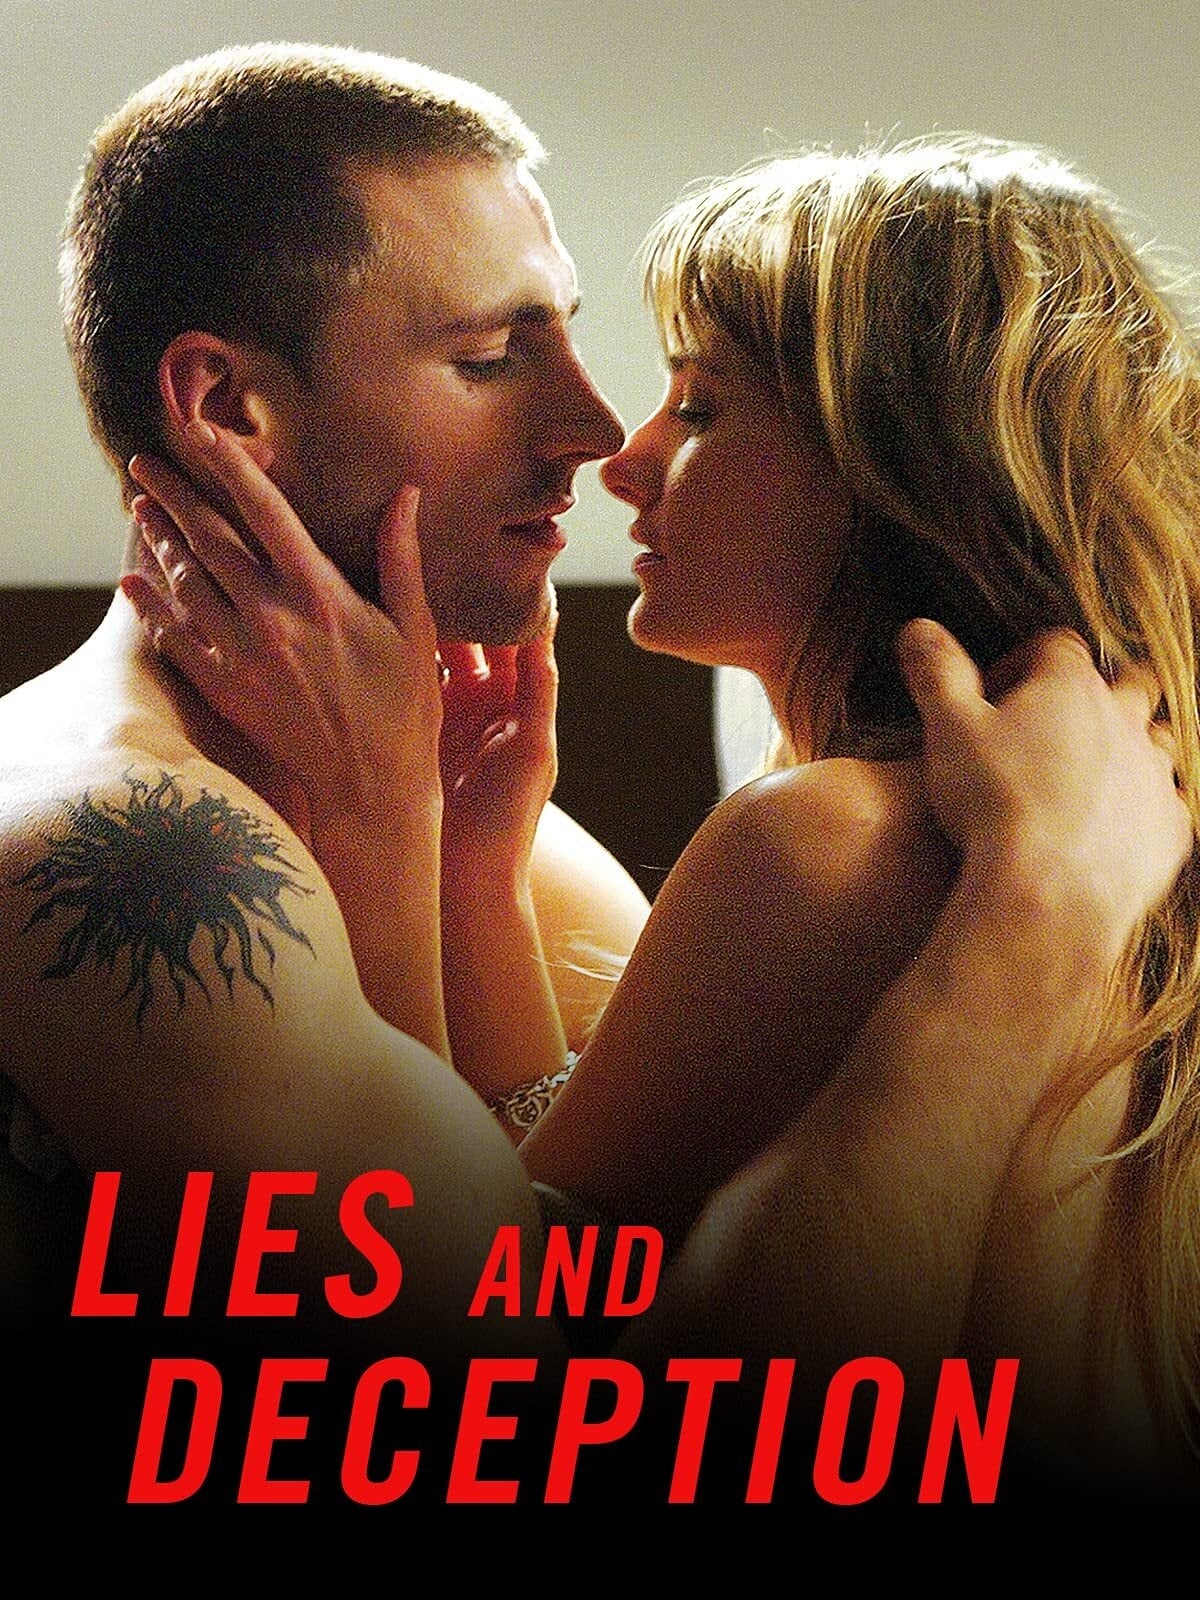 Lies and Deception (2005)